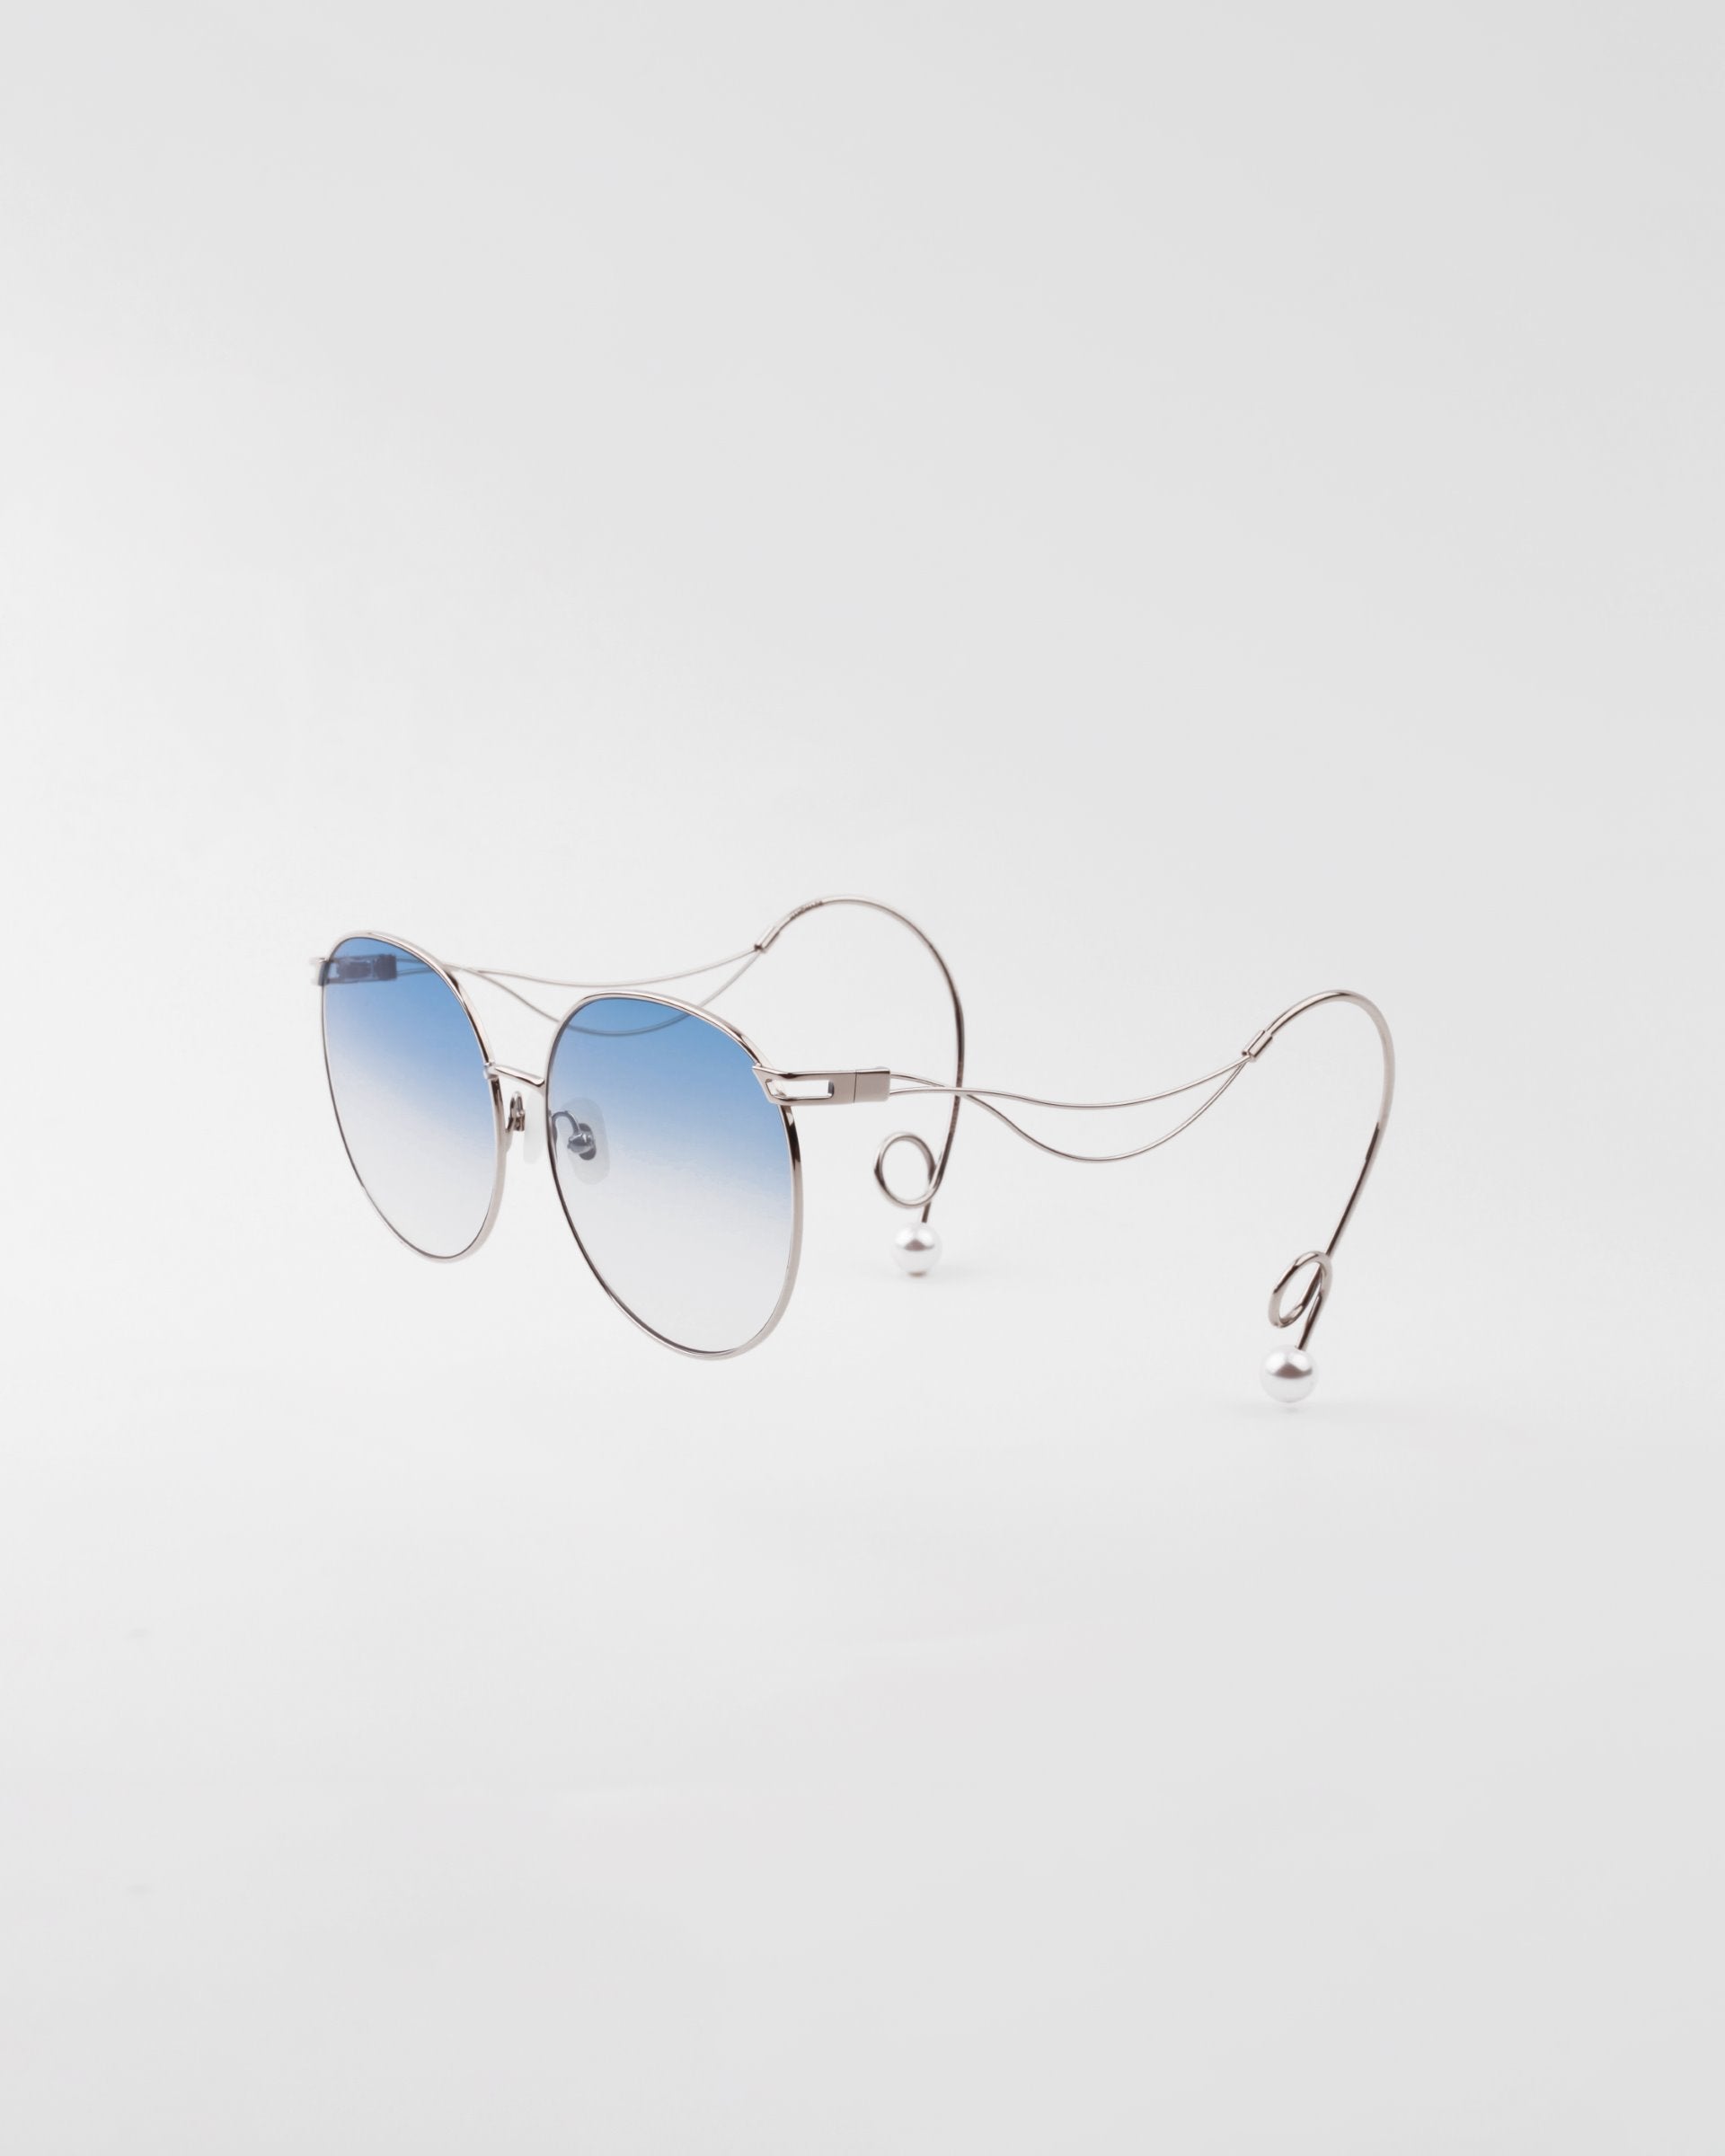 A pair of round sunglasses featuring handcrafted gold-plated frames and blue gradient, shatter-resistant lenses. The arms have an intricate, looping design that adds a unique and stylish touch. Hypoallergenic nose pads ensure comfort. The background is plain white. This is the Birthday Cake by For Art&#39;s Sake®.